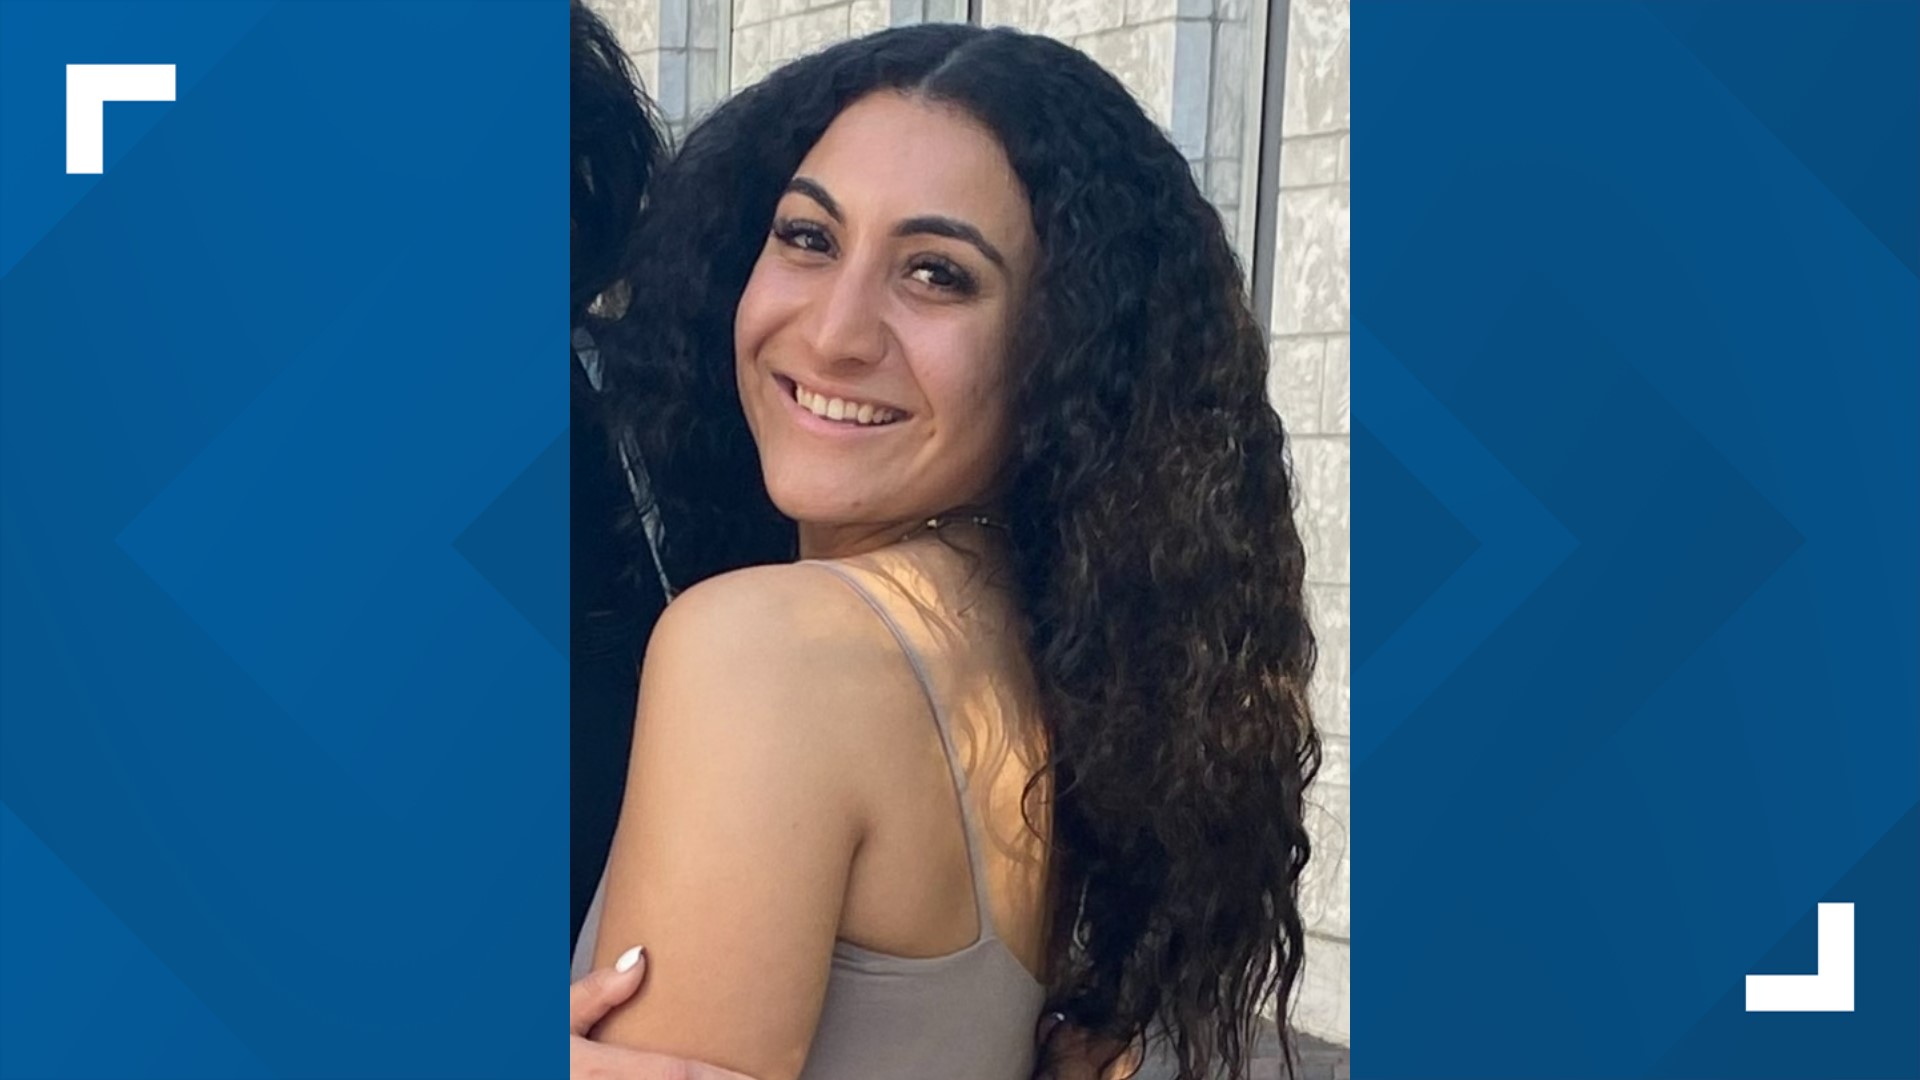 Police searching for missing Ohio State student | 10tv.com